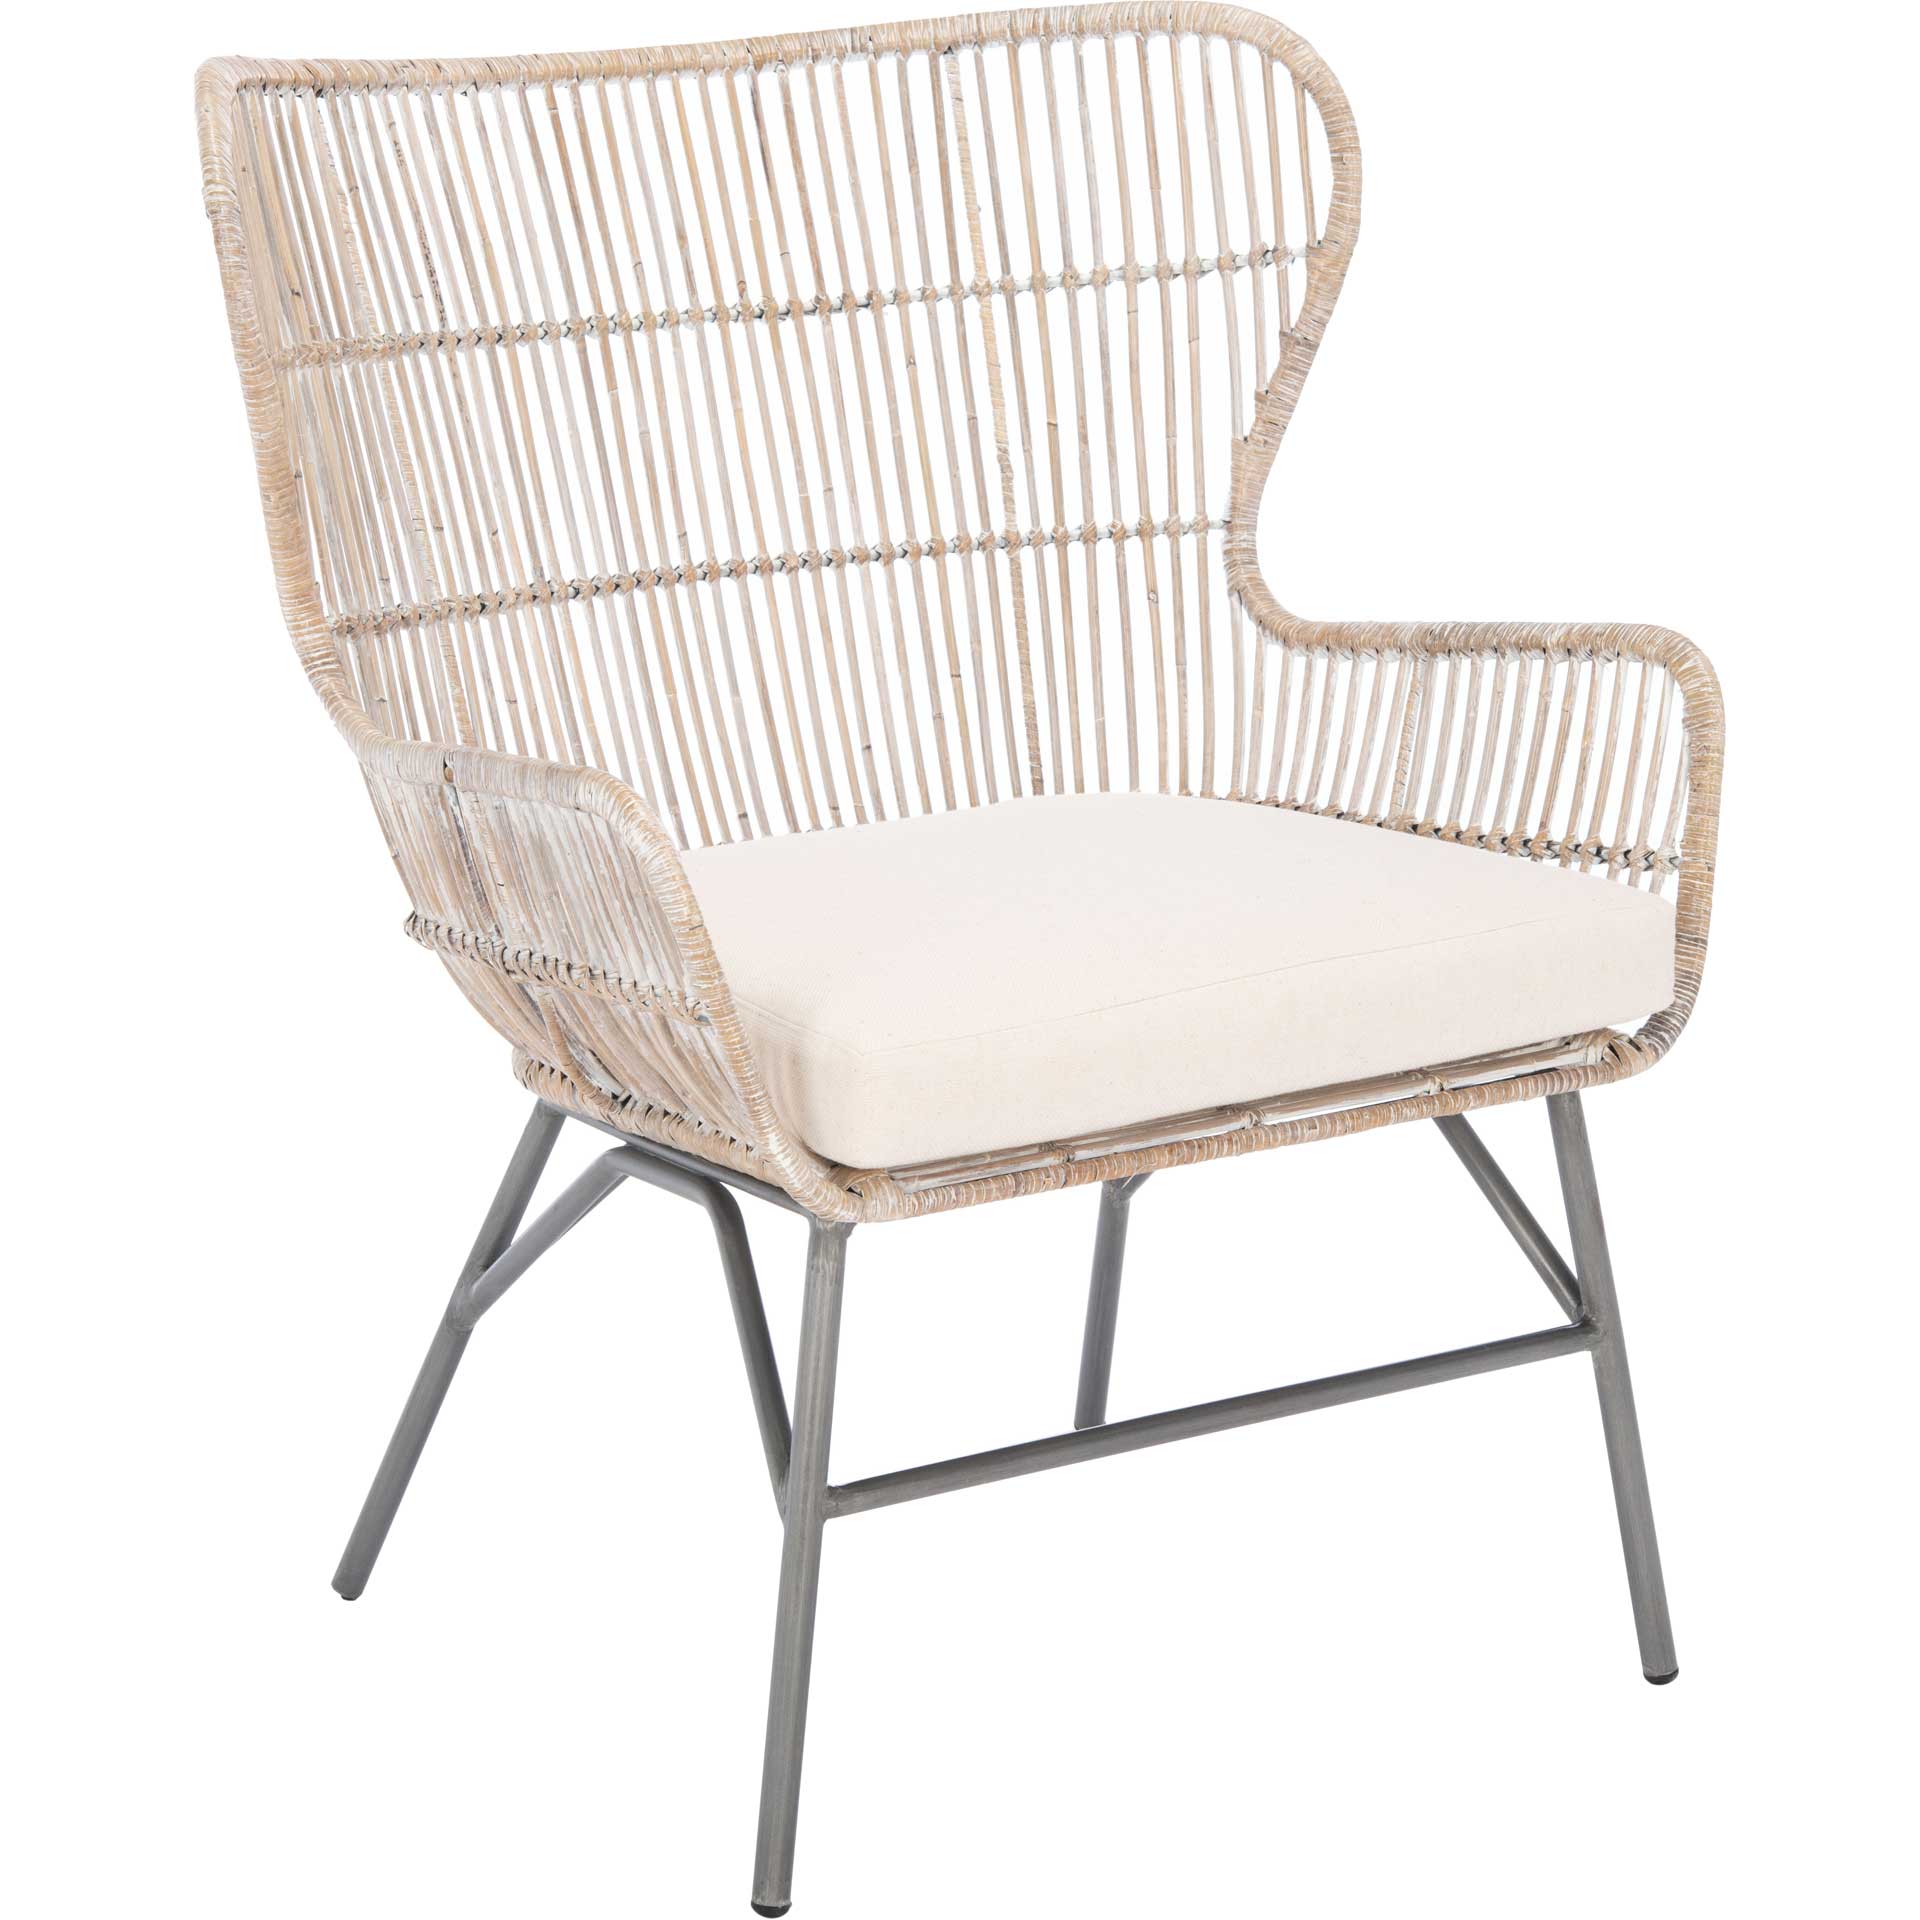 Leary Rattan Accent Chair Gray White Wash/Black